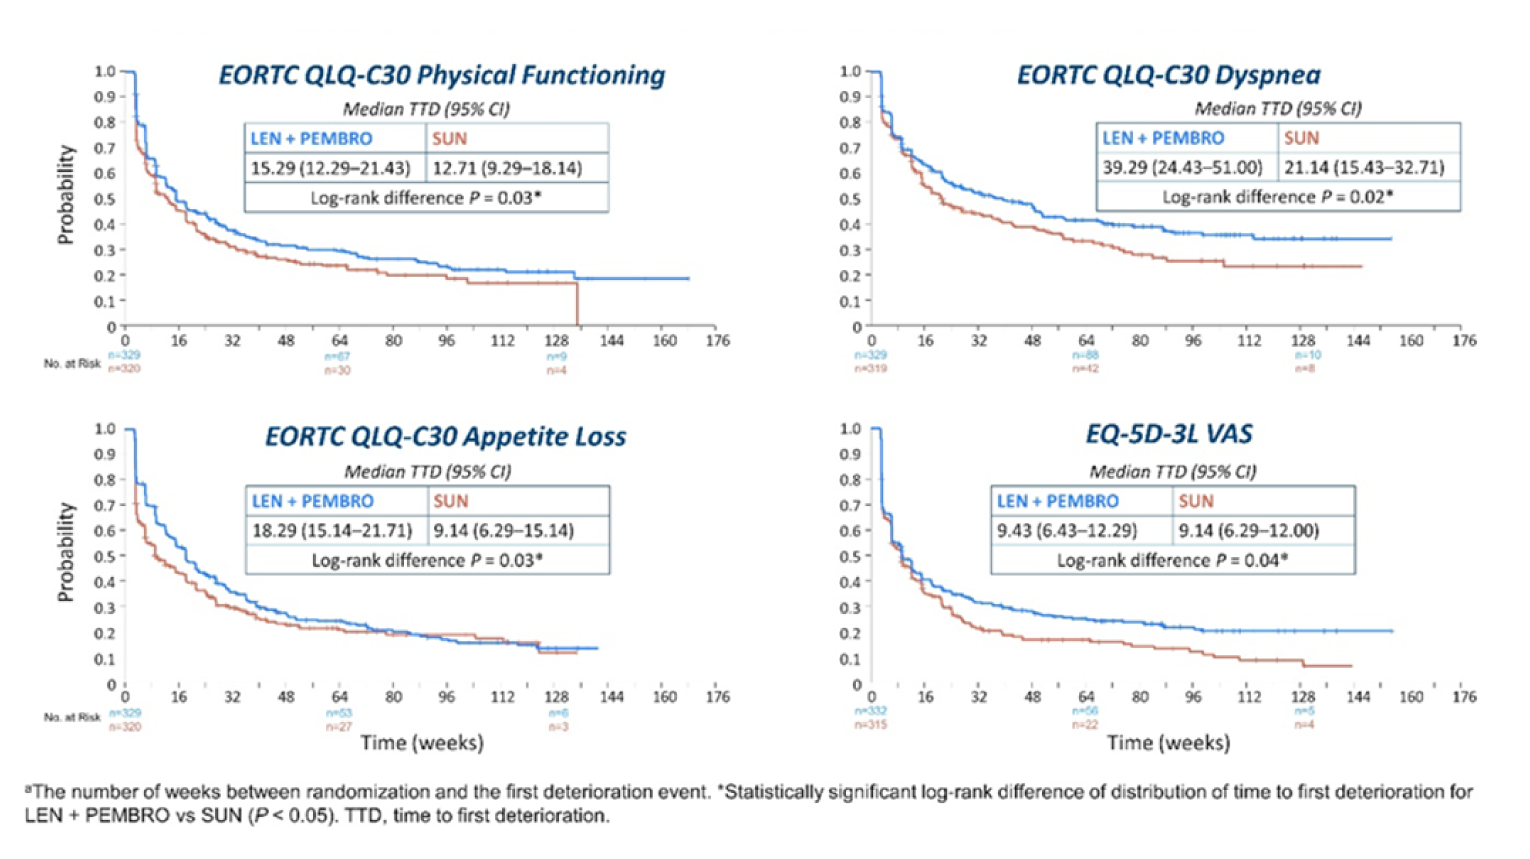 Kaplan-Meier plots of time to first deterioration for different quality of life scales (EORTC QLQ-C30 physical function scale, dyspnea subscale, and appetite loss subscale, and the EQ-5D-3L Visual Analogue Scale) administered to patients receiving LEN-PEM or SUN at 0, 16, 32, 48, 64, 80, 96, 112, 128, 144, 160, and 176 weeks. The median time to first deterioration with the corresponding 95% confidence intervals was calculated. Separation of curves is not maintained over time for the EORTC QLQ-C30 appetite loss subscale.